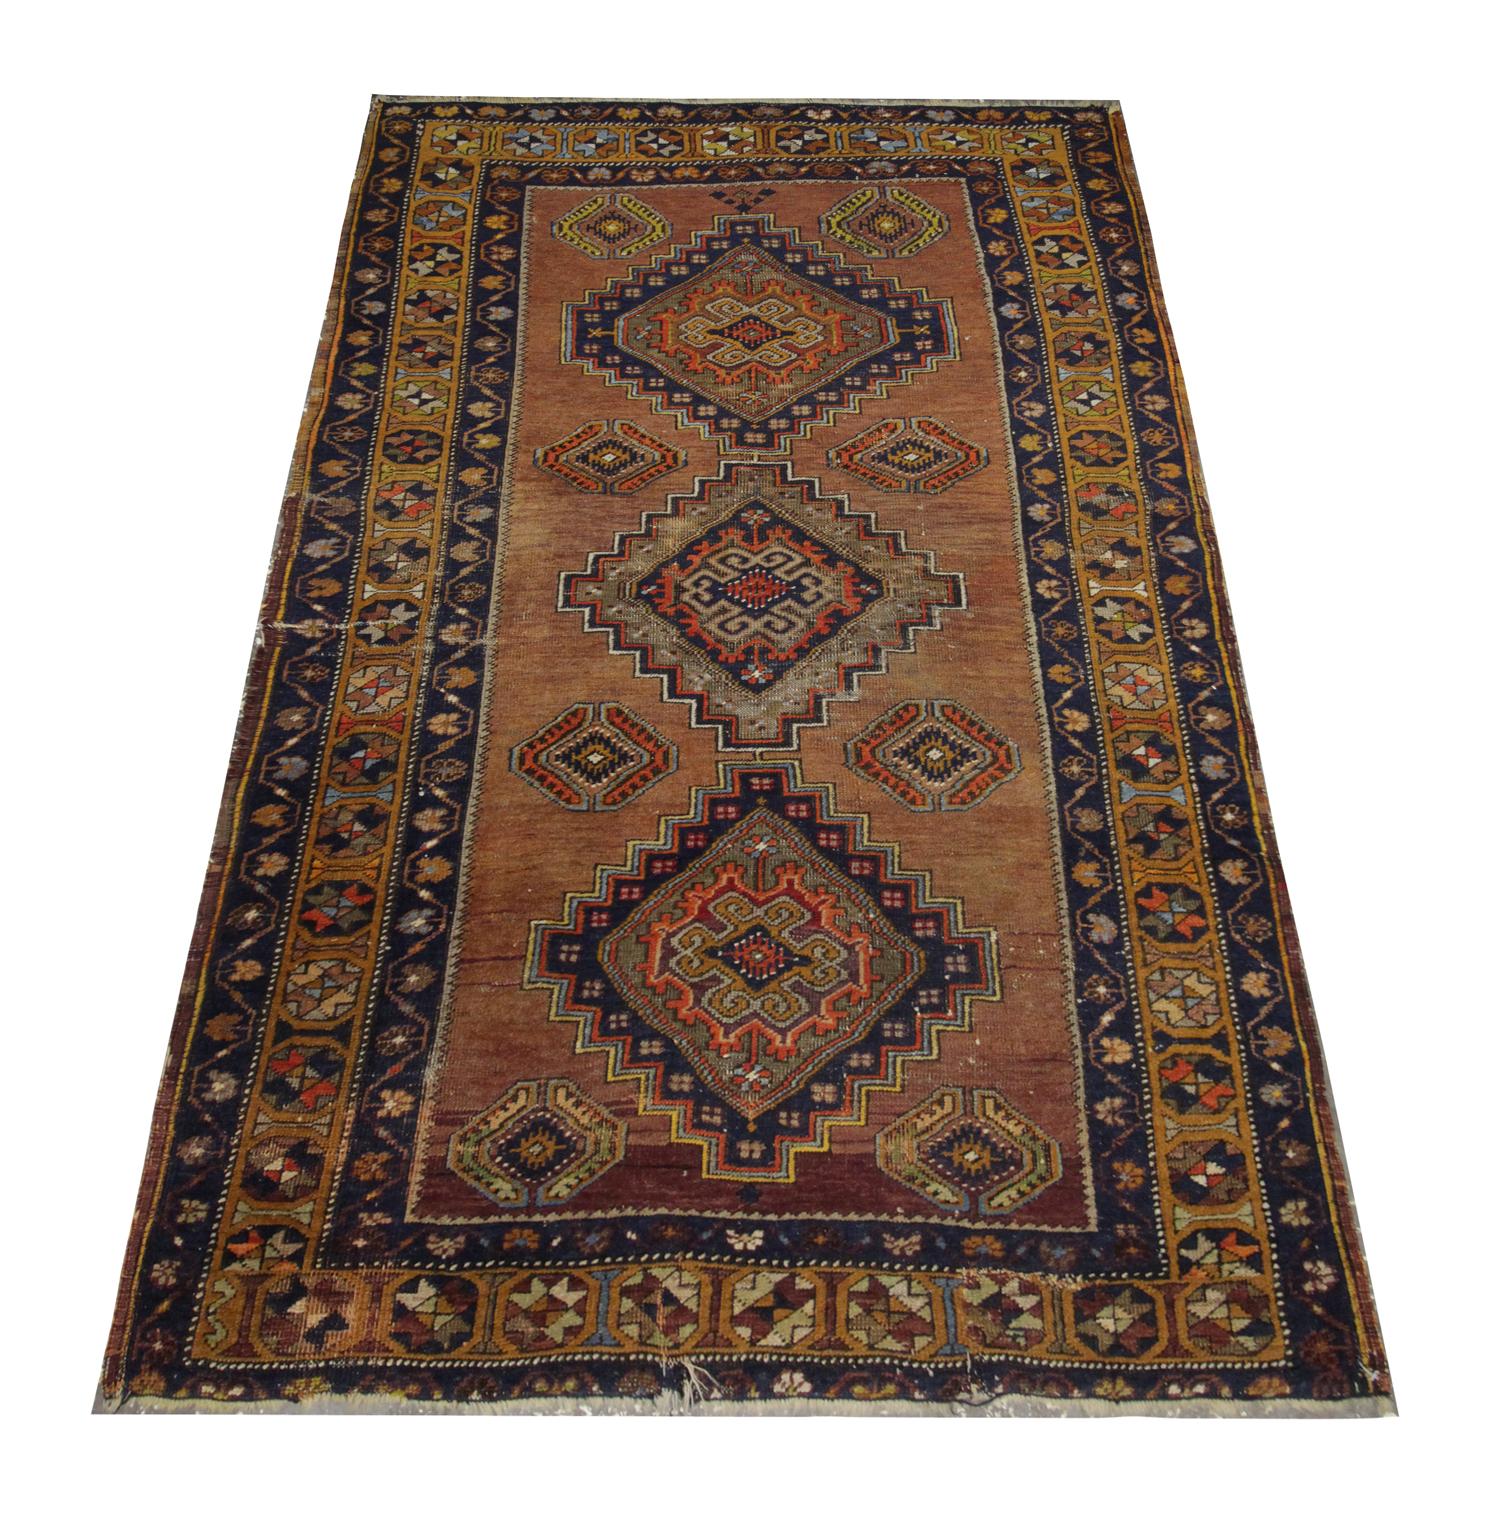 This fine wool rug is a great example of oriental rugs woven in the early 20th century. The central design features a bold medallion pattern woven in deep blue, orange and beige on a brown/beige background. A repeating motif pattern border has then